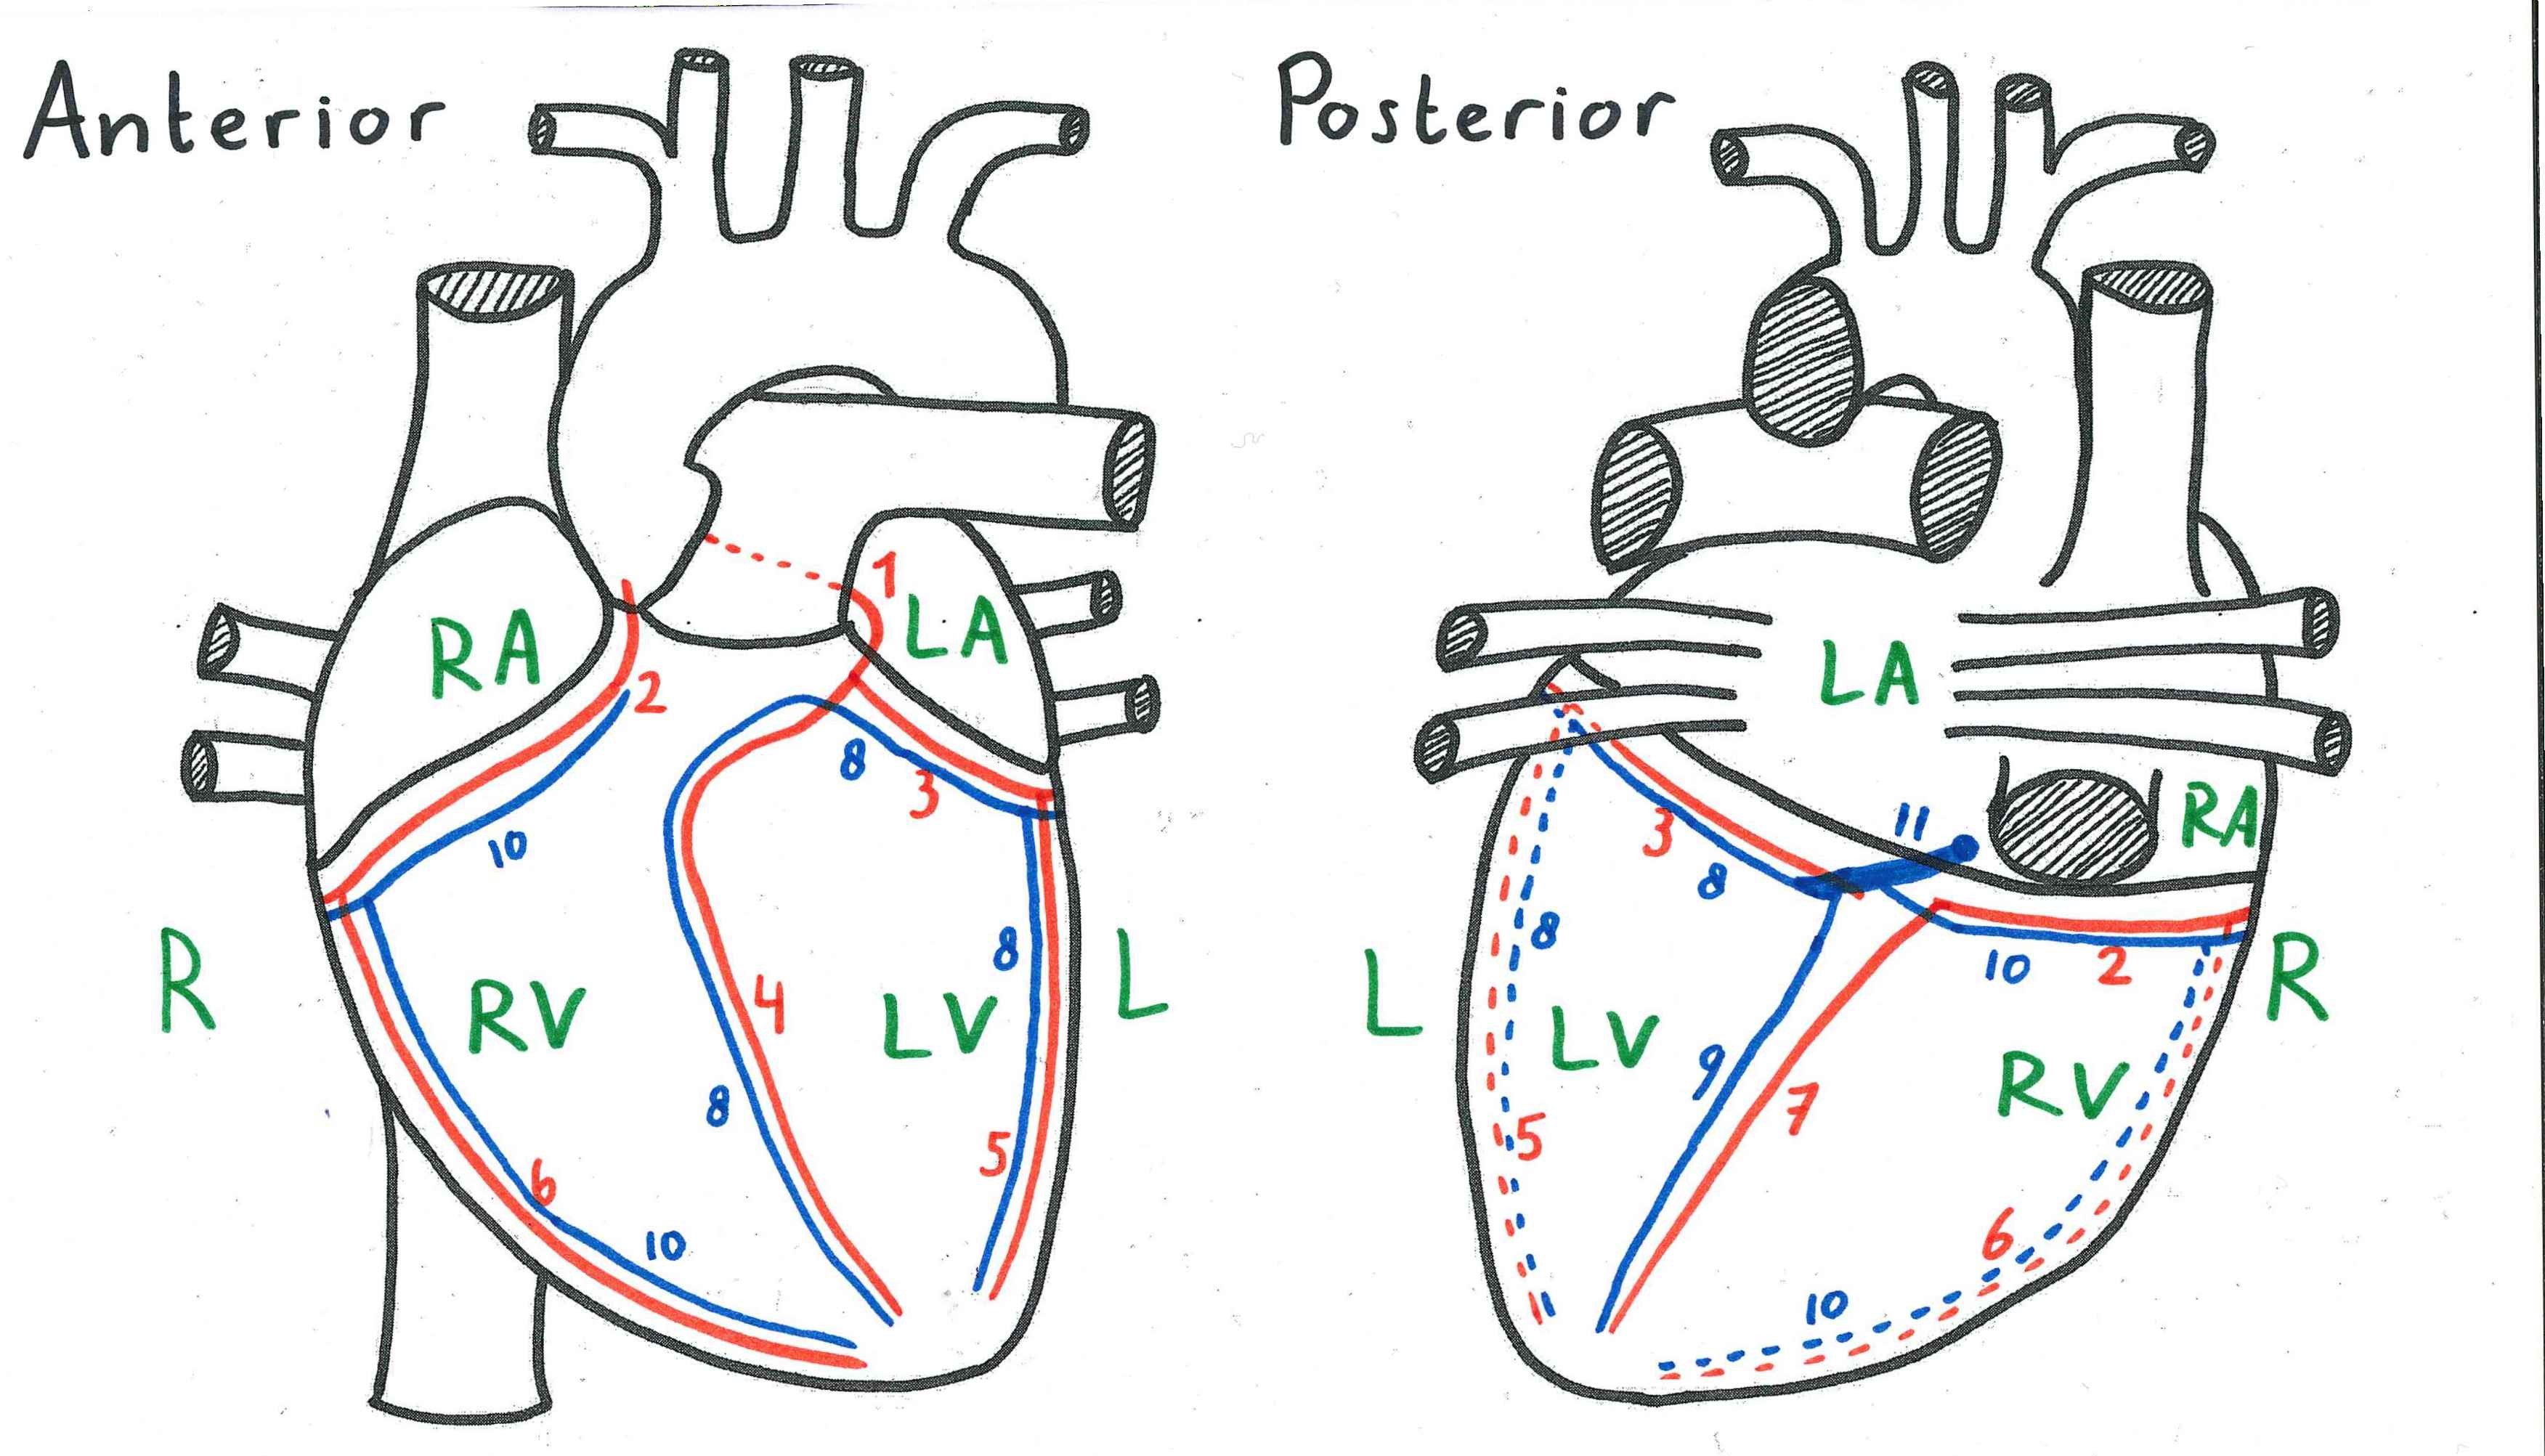 A drawing of the heart as seen from anterior and posterior including the coronary arteries and vein, with numbered labels